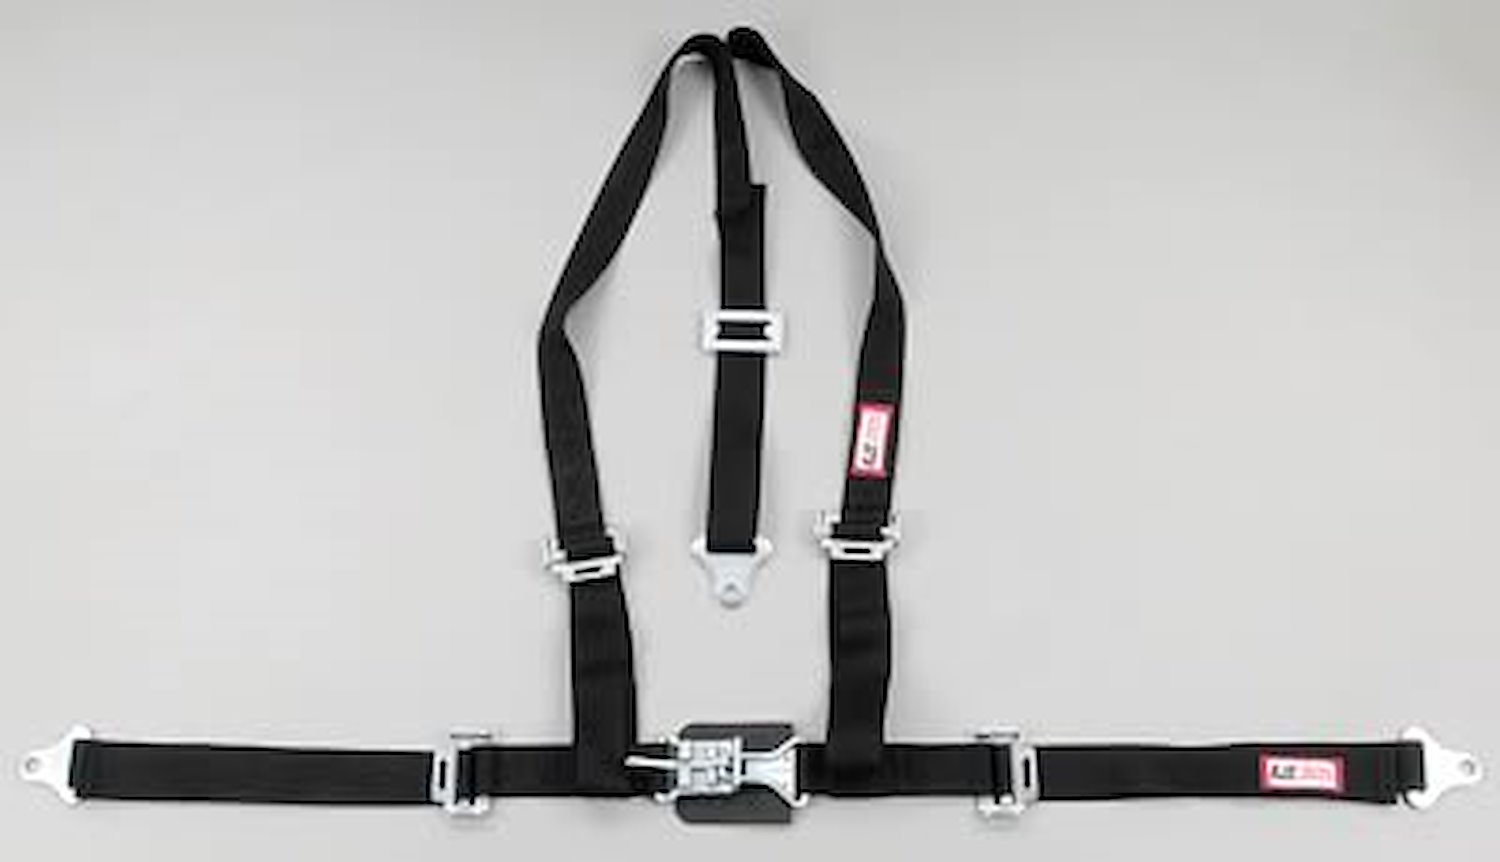 NON-SFI L&L HARNESS 3 PULL DOWN Lap Belt w/adjuster 2 S.H. V ROLL BAR Mount w/STERNUM STRAP ALL SNAP ENDS RED